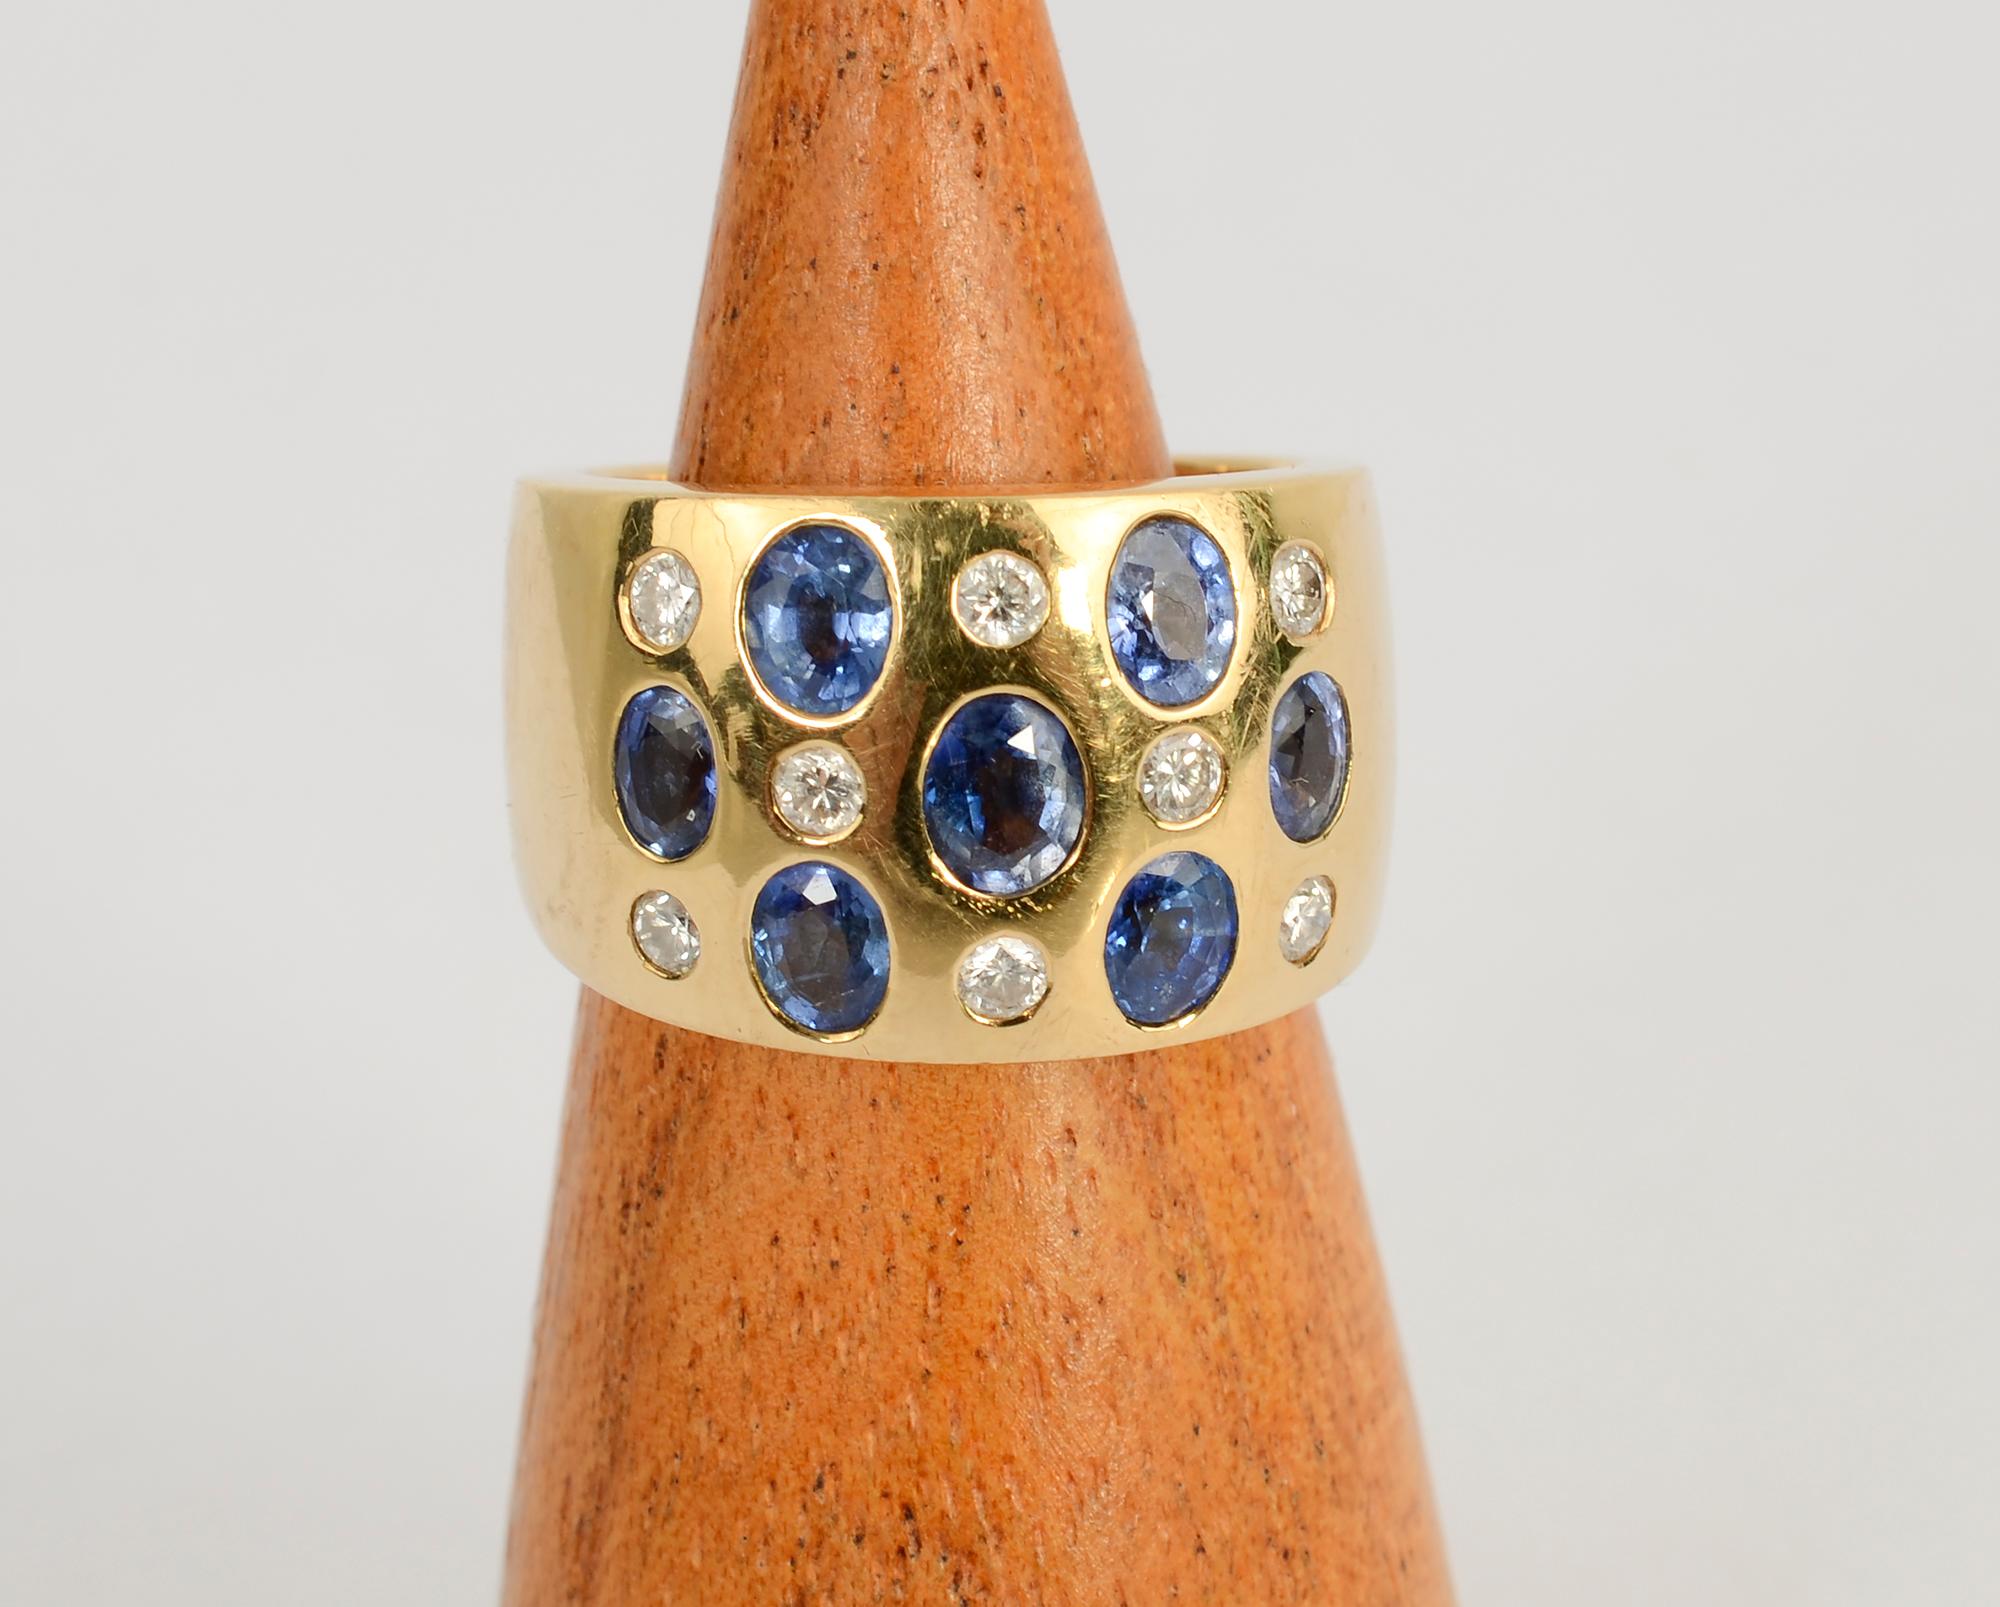 Stylish wide gold band ring with sapphires and diamonds. The 7 oval sapphires weigh a total of slightly more than one carat. Eight round diamonds weigh a total of slightly less than a carat. The ring is 7/16” wide in the front tapering to 5/16” at